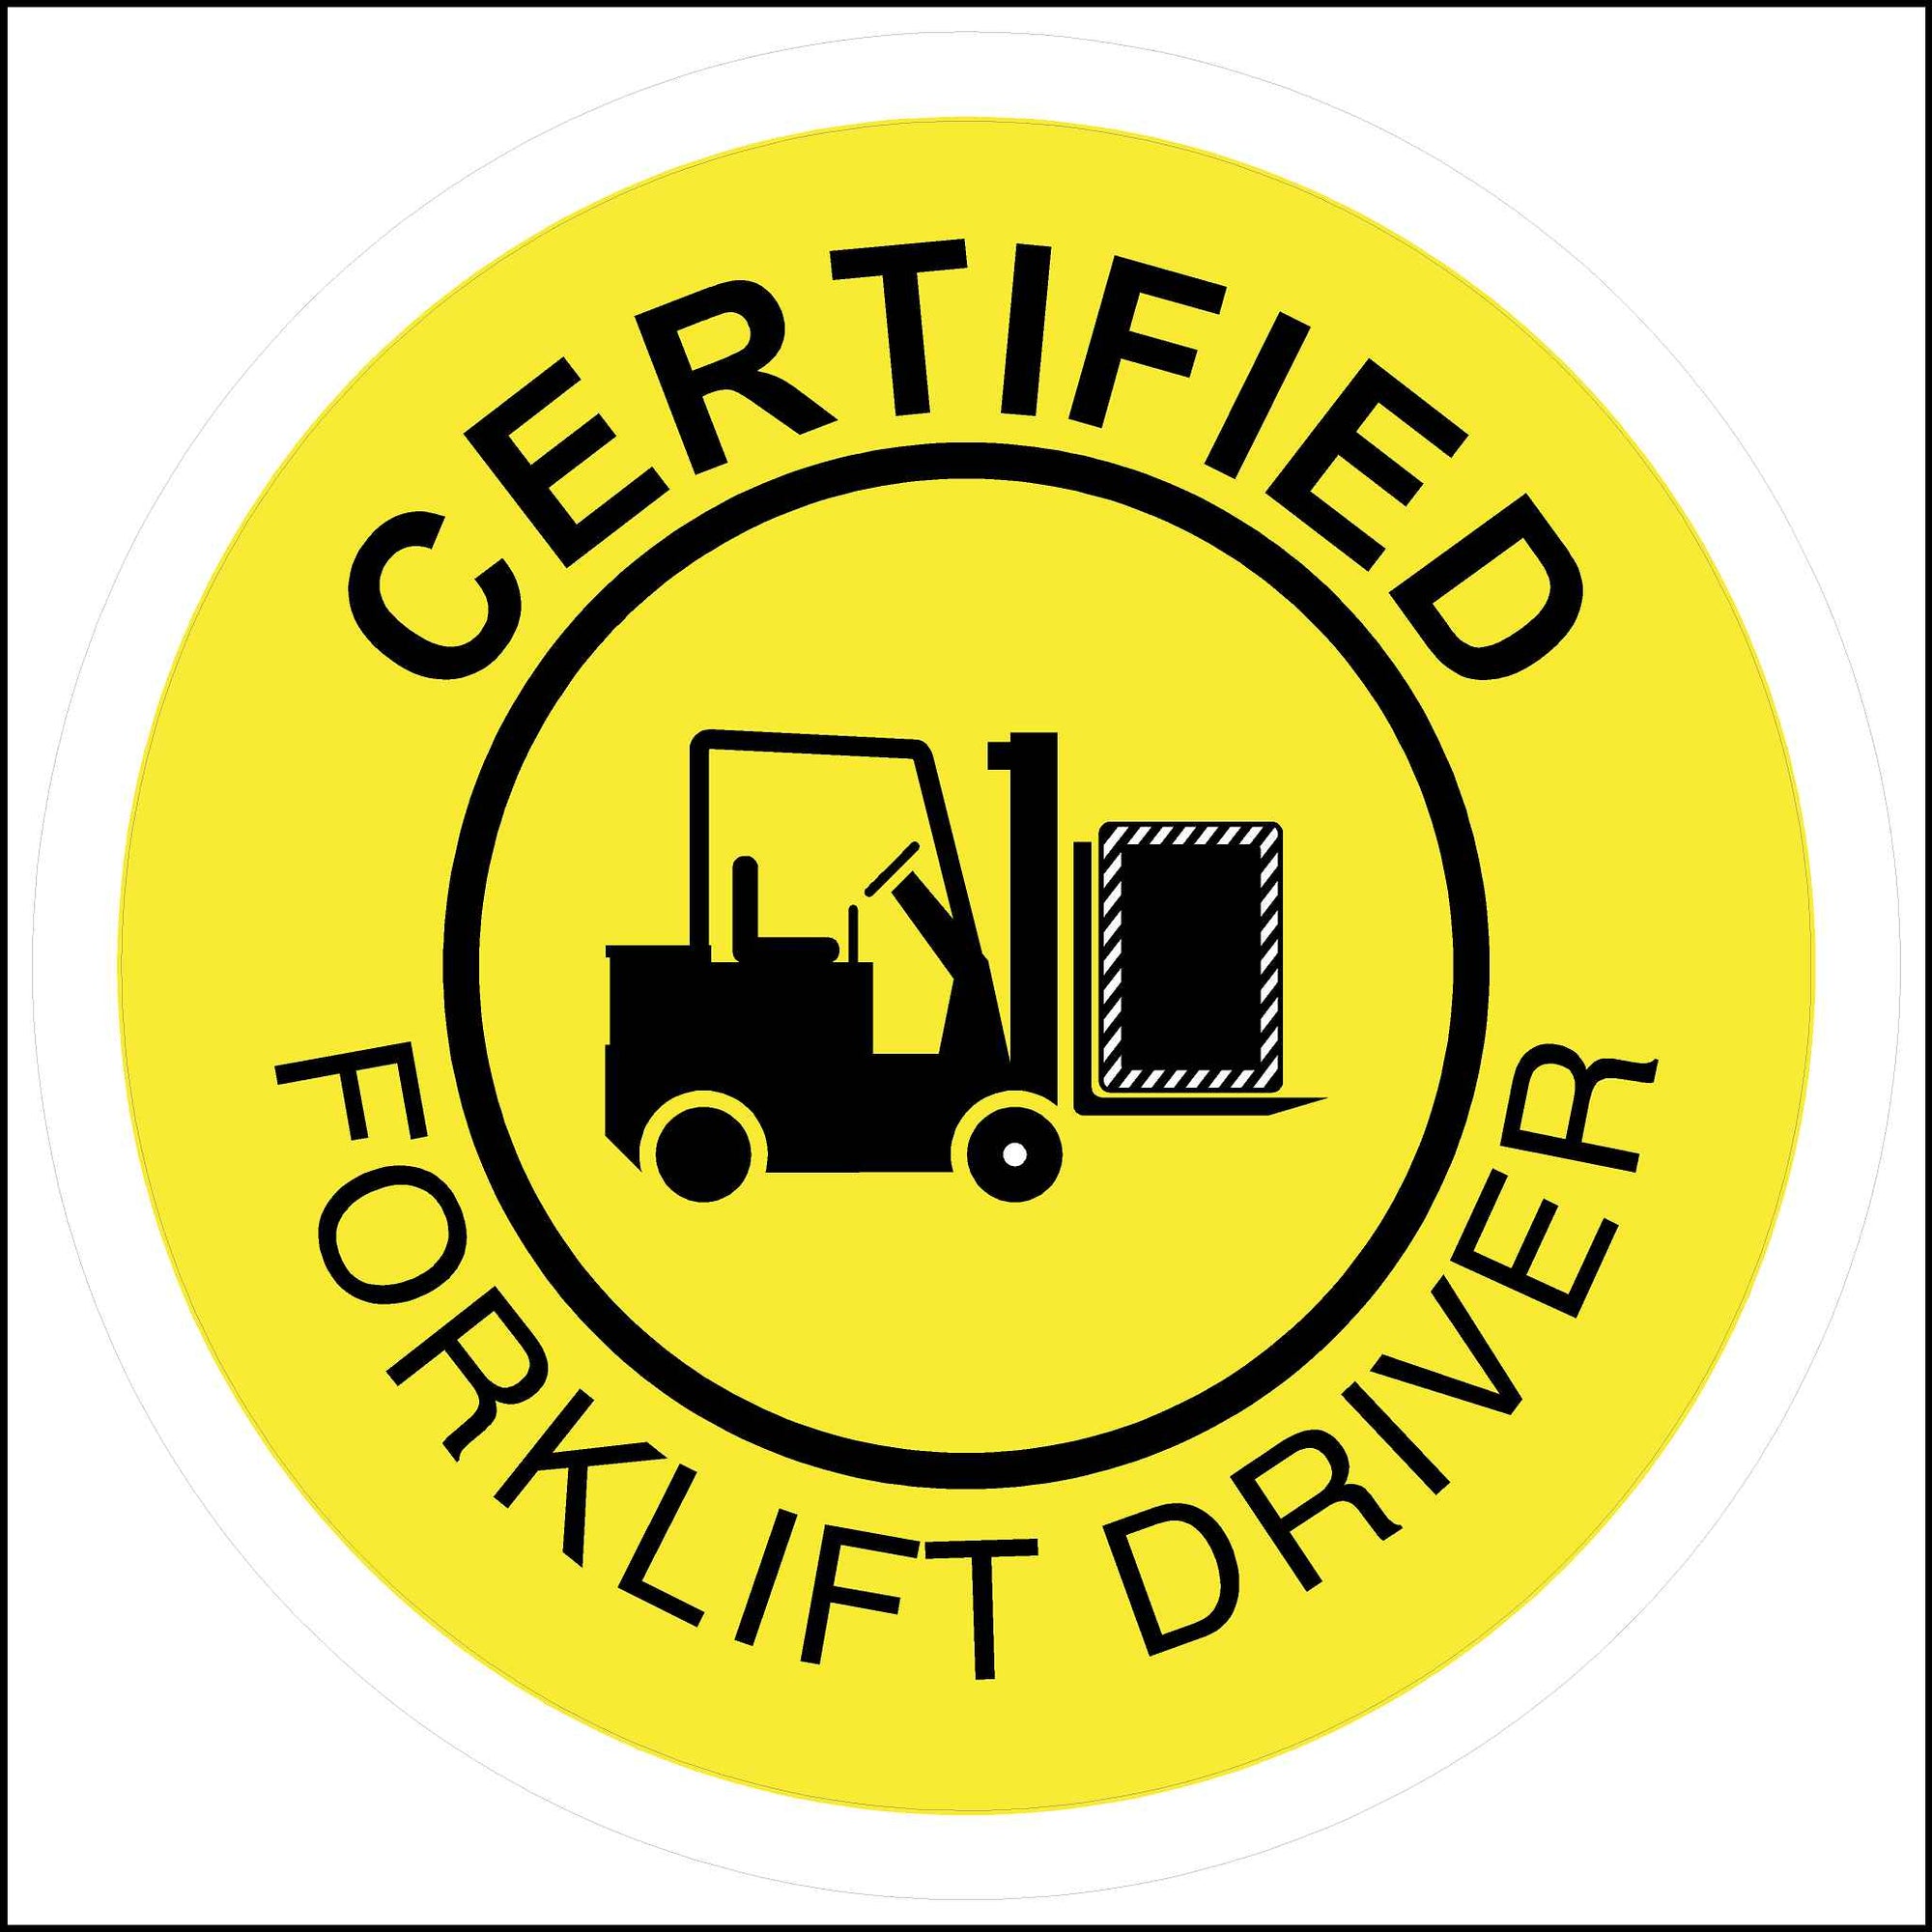 Certified Forklift Driver Hard Hat Decal printed in black with yellow background.